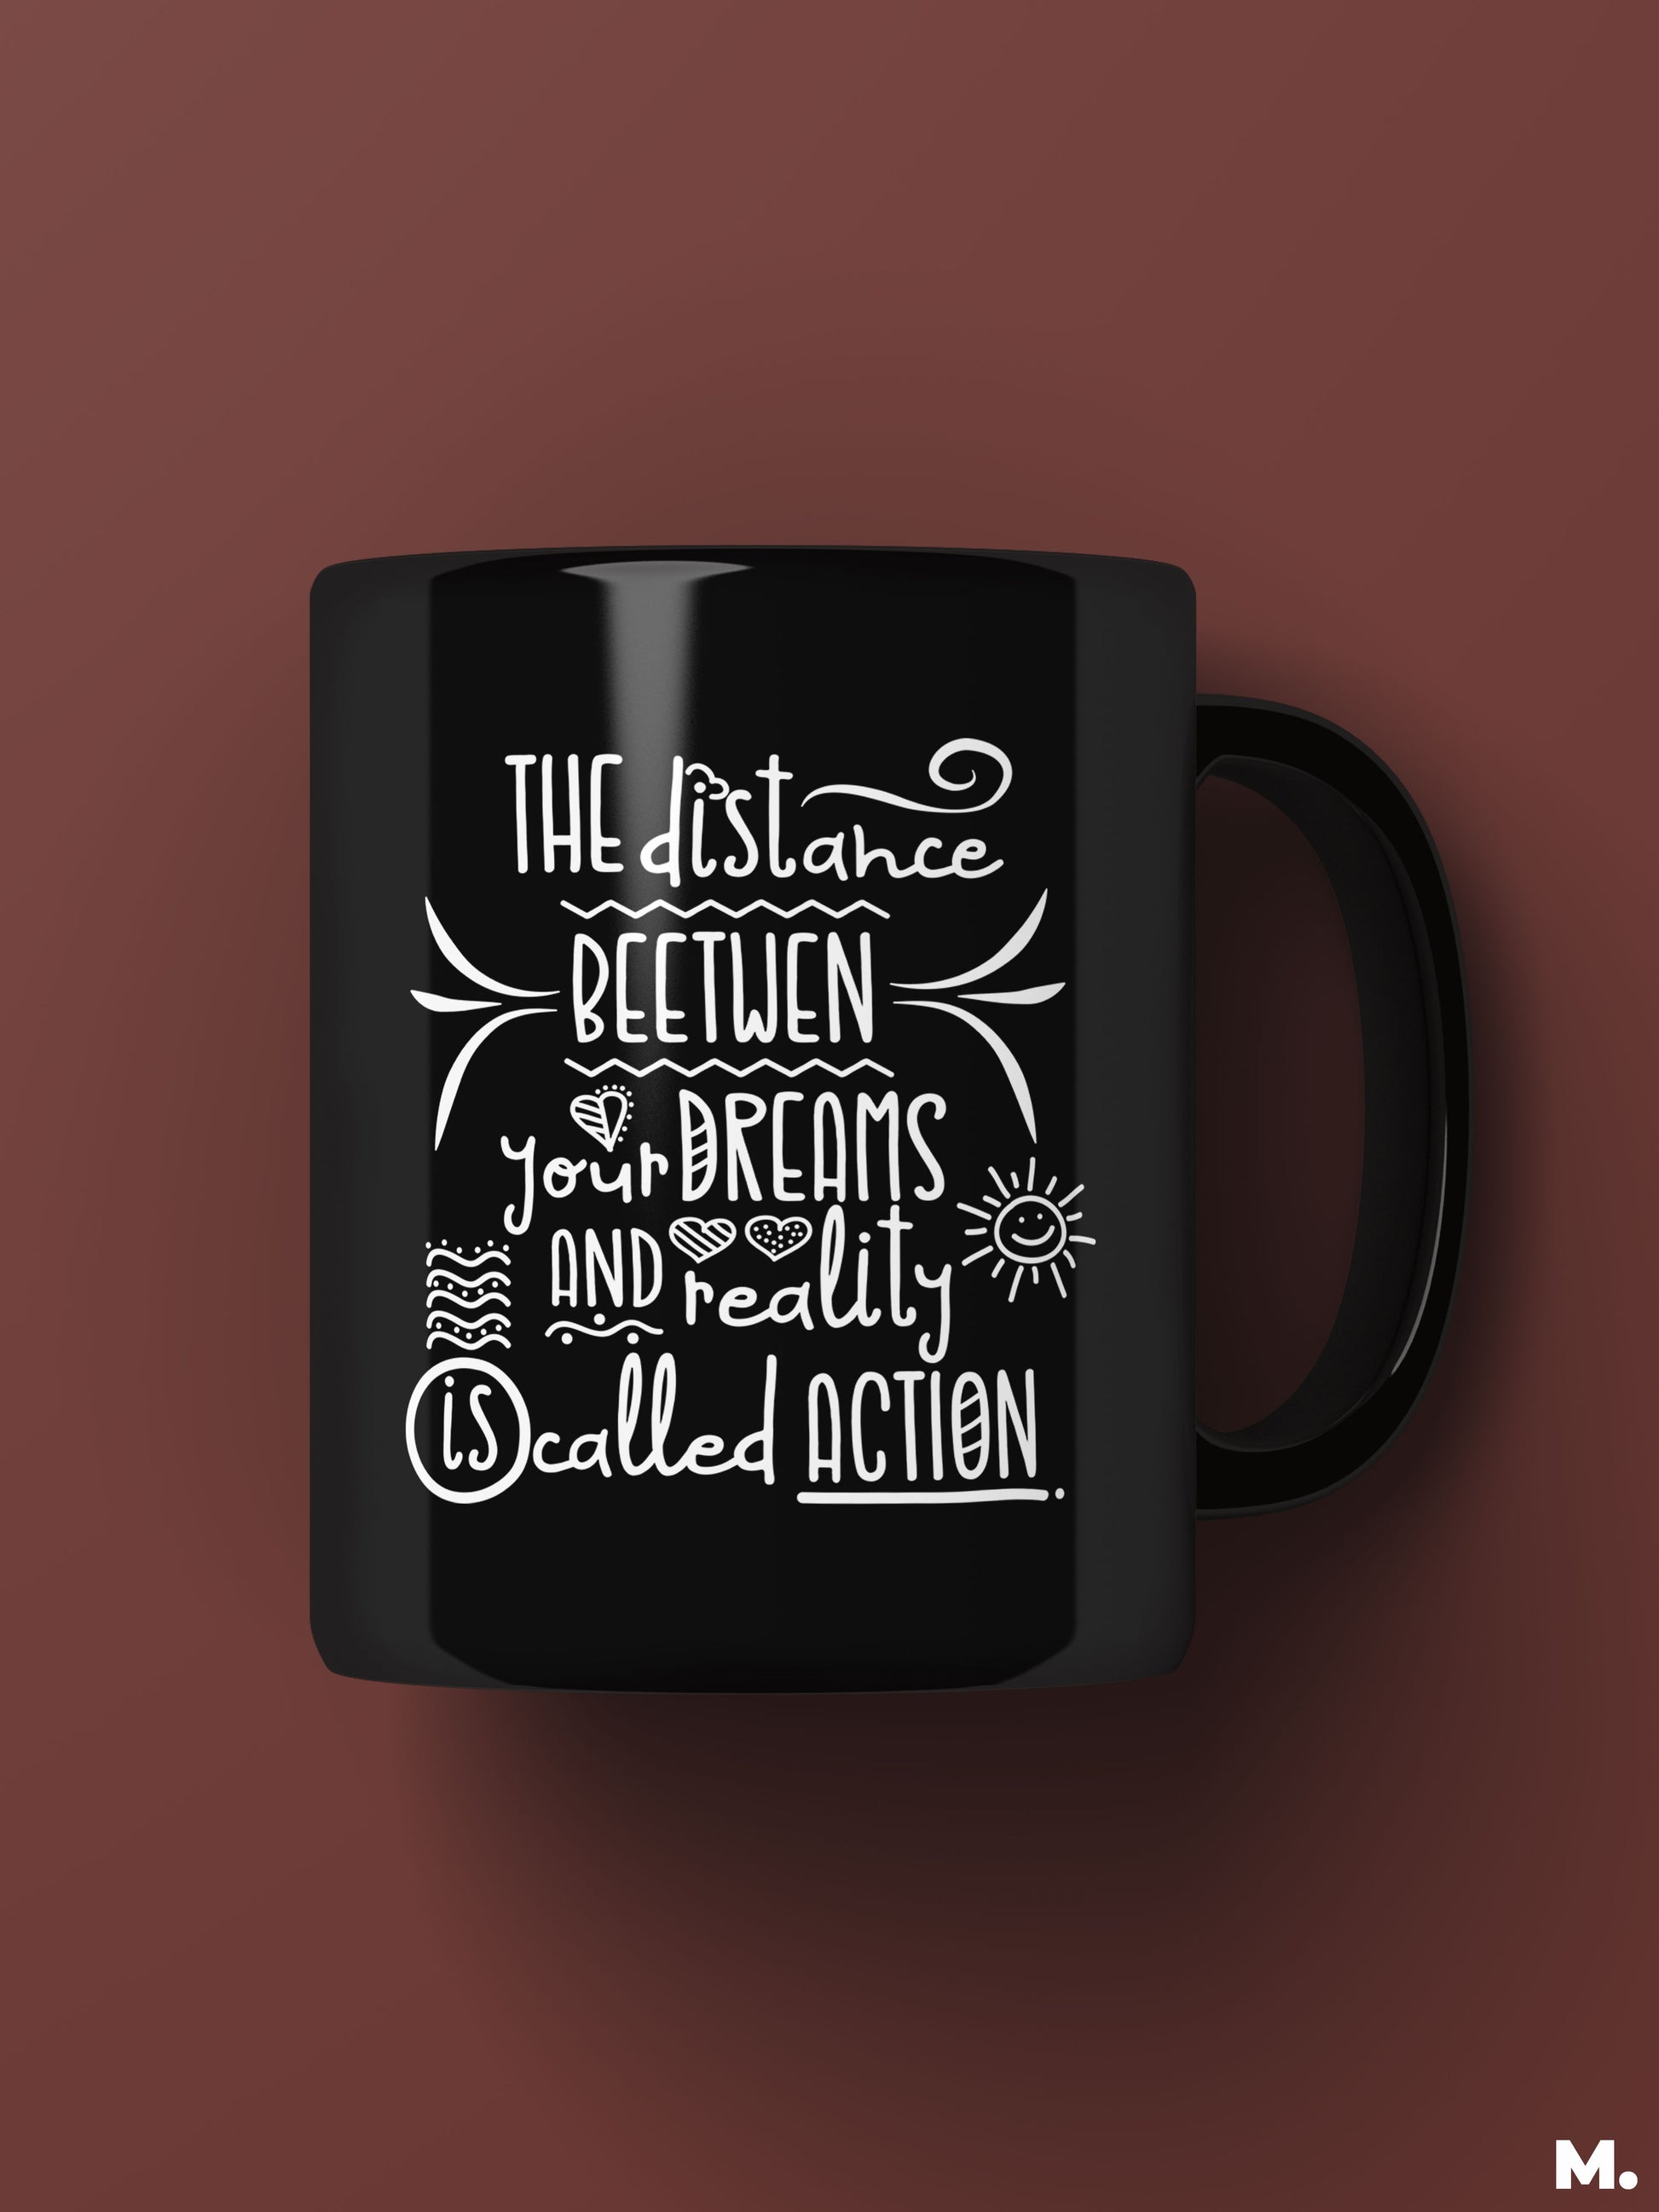 Black coffee printed mugs online printed with the motivational quote "The distance between your dreams and reality is called action"